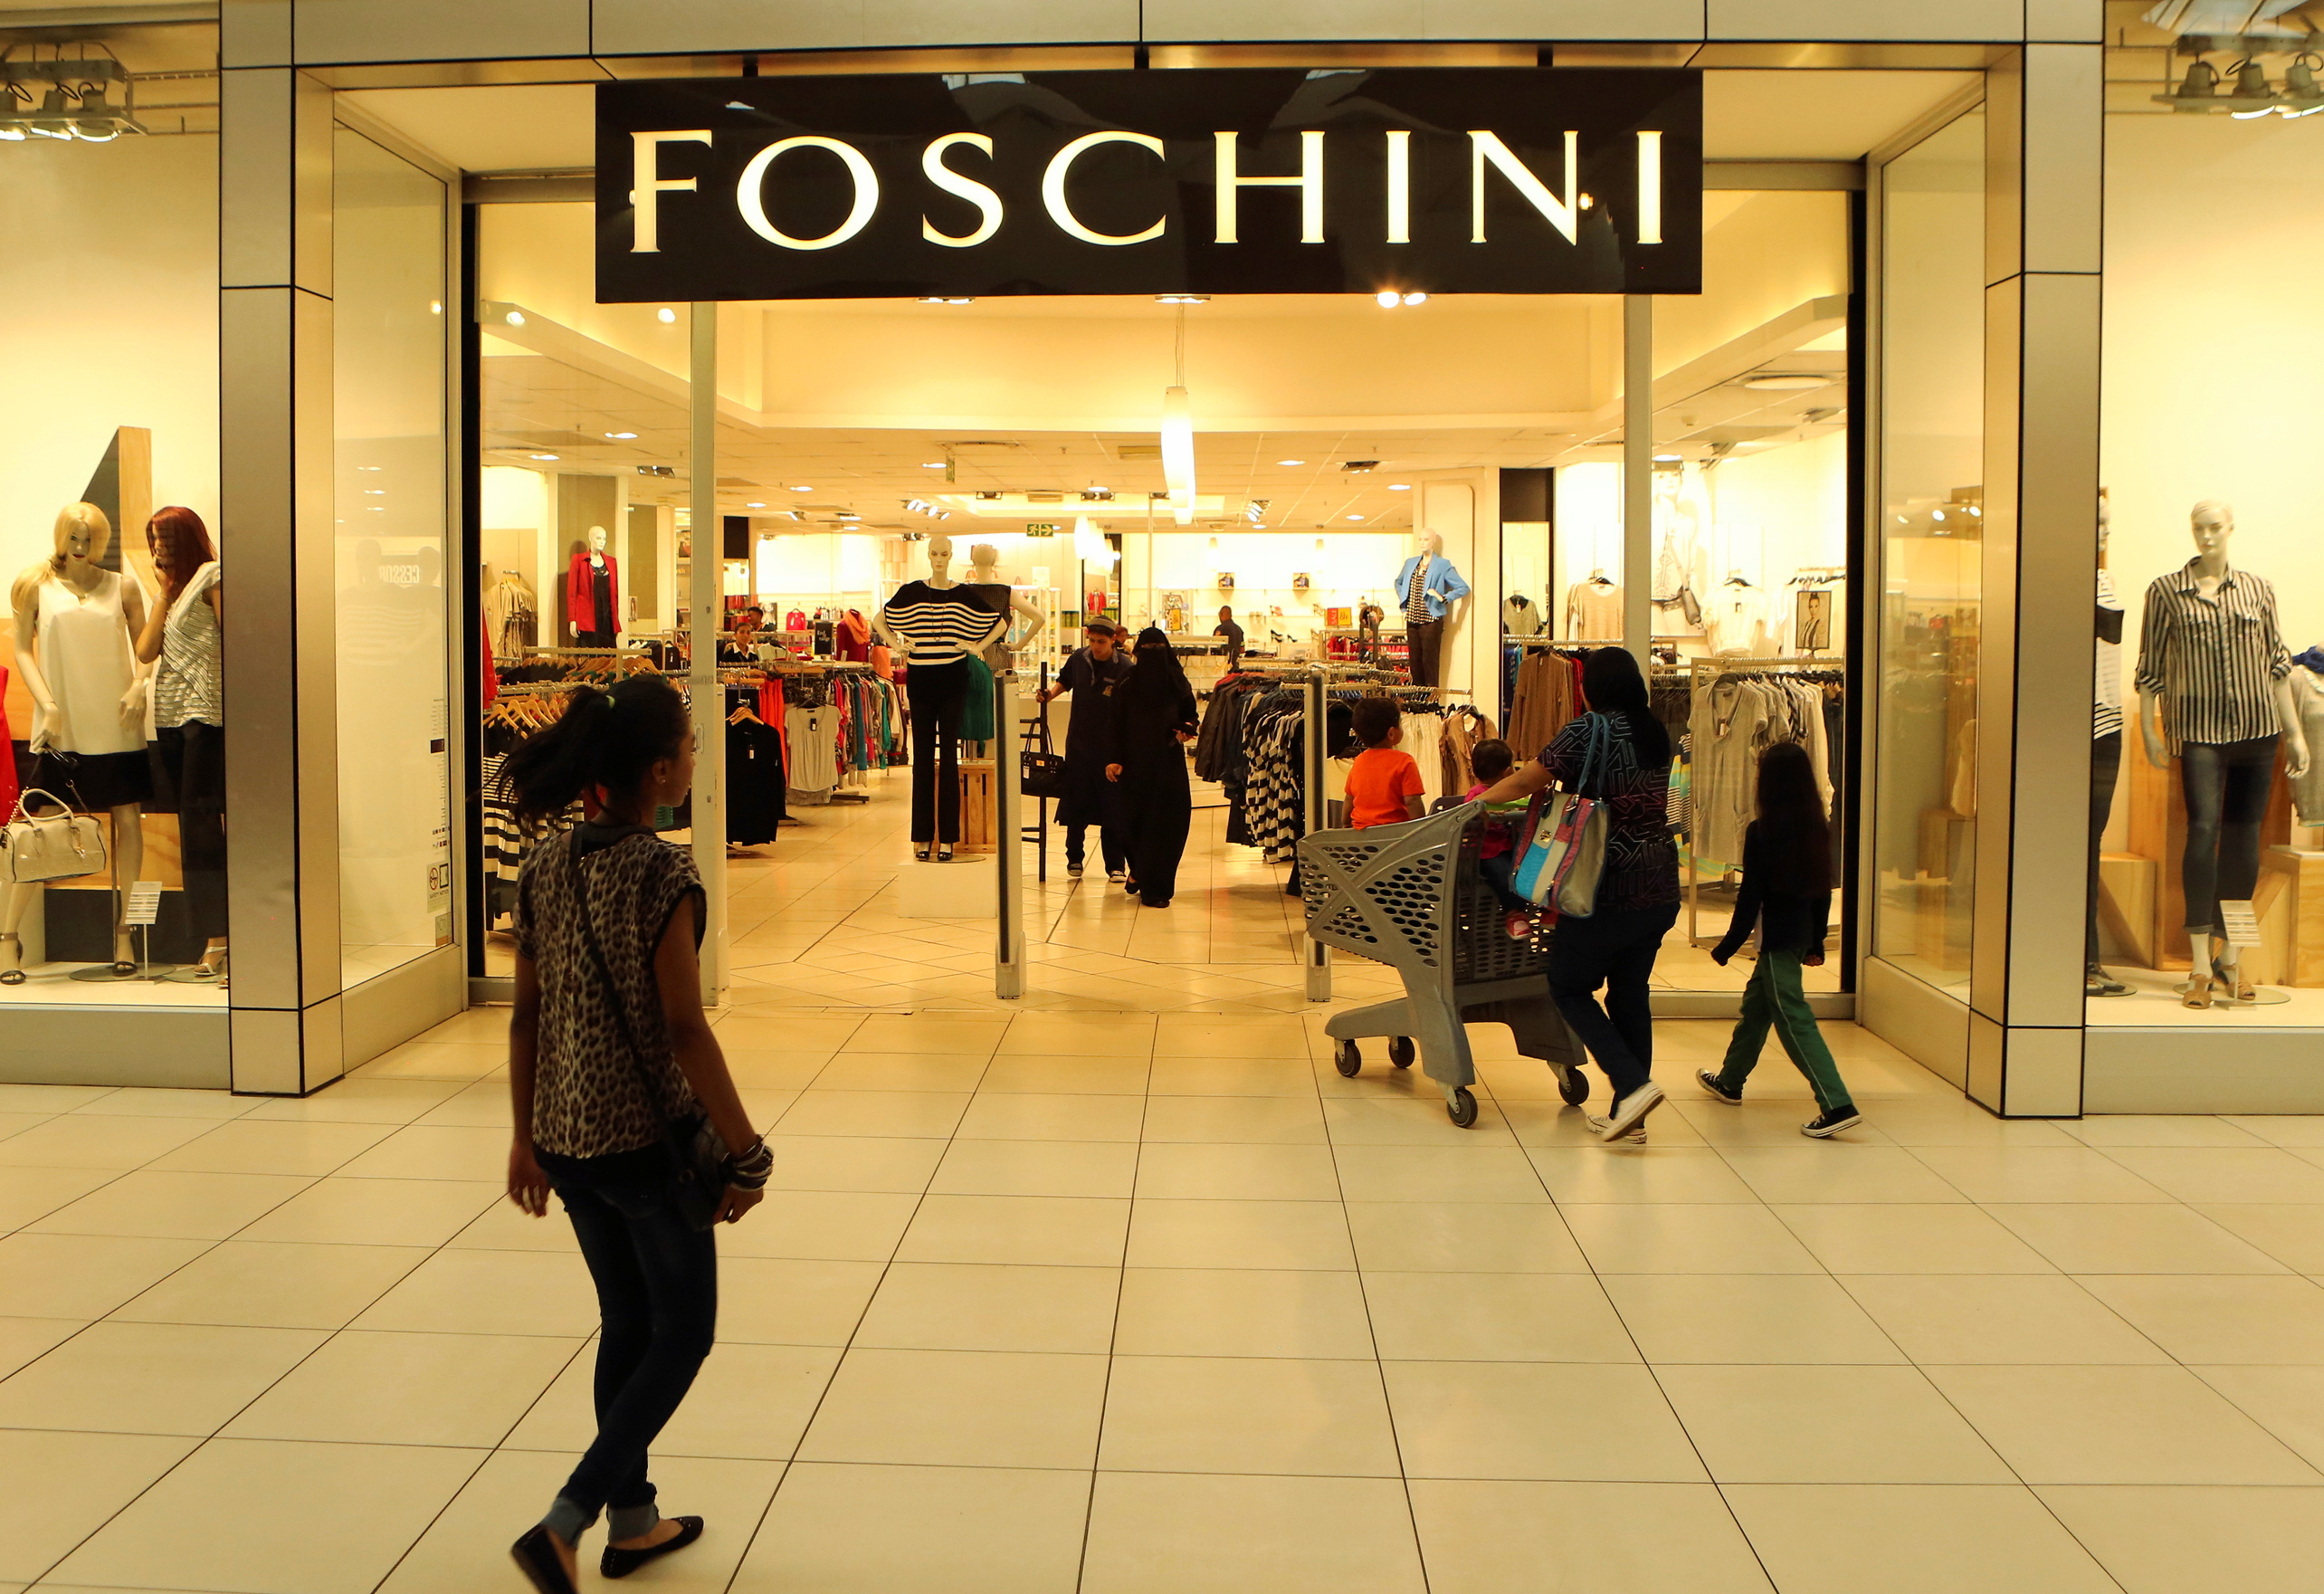   A shopper walks past a Foschini store at a shopping centre in Lenasia, south of Johannesburg, file.   REUTERS/Siphiwe Sibeko/File Photo